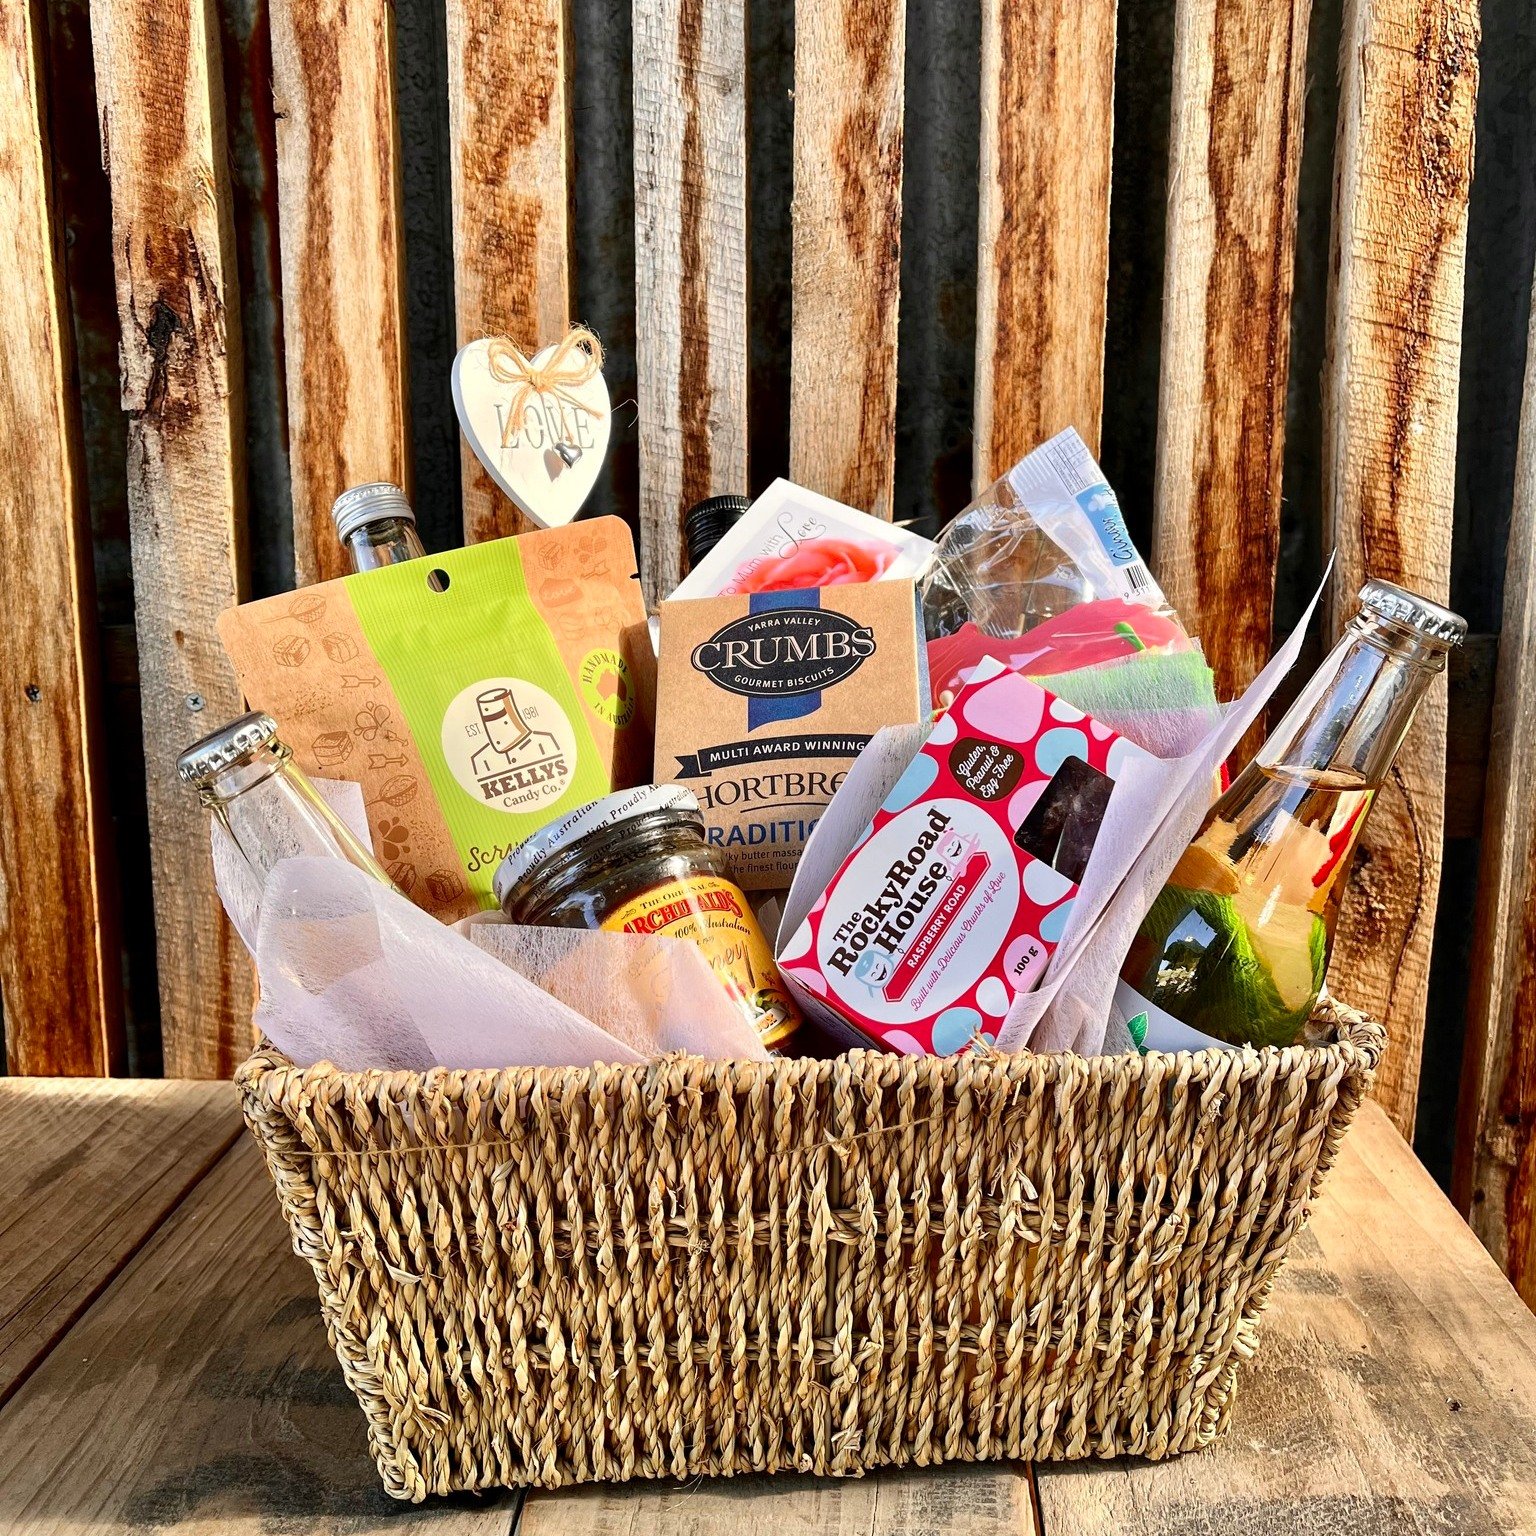 Looking for the perfect gift for a mum in your life, we've got you covered ♡

We have ready made hampers for mothers day and are able to custom make hampers to your liking !
Pop into our Farm Gate shop and ask one of our friendly team members for hel